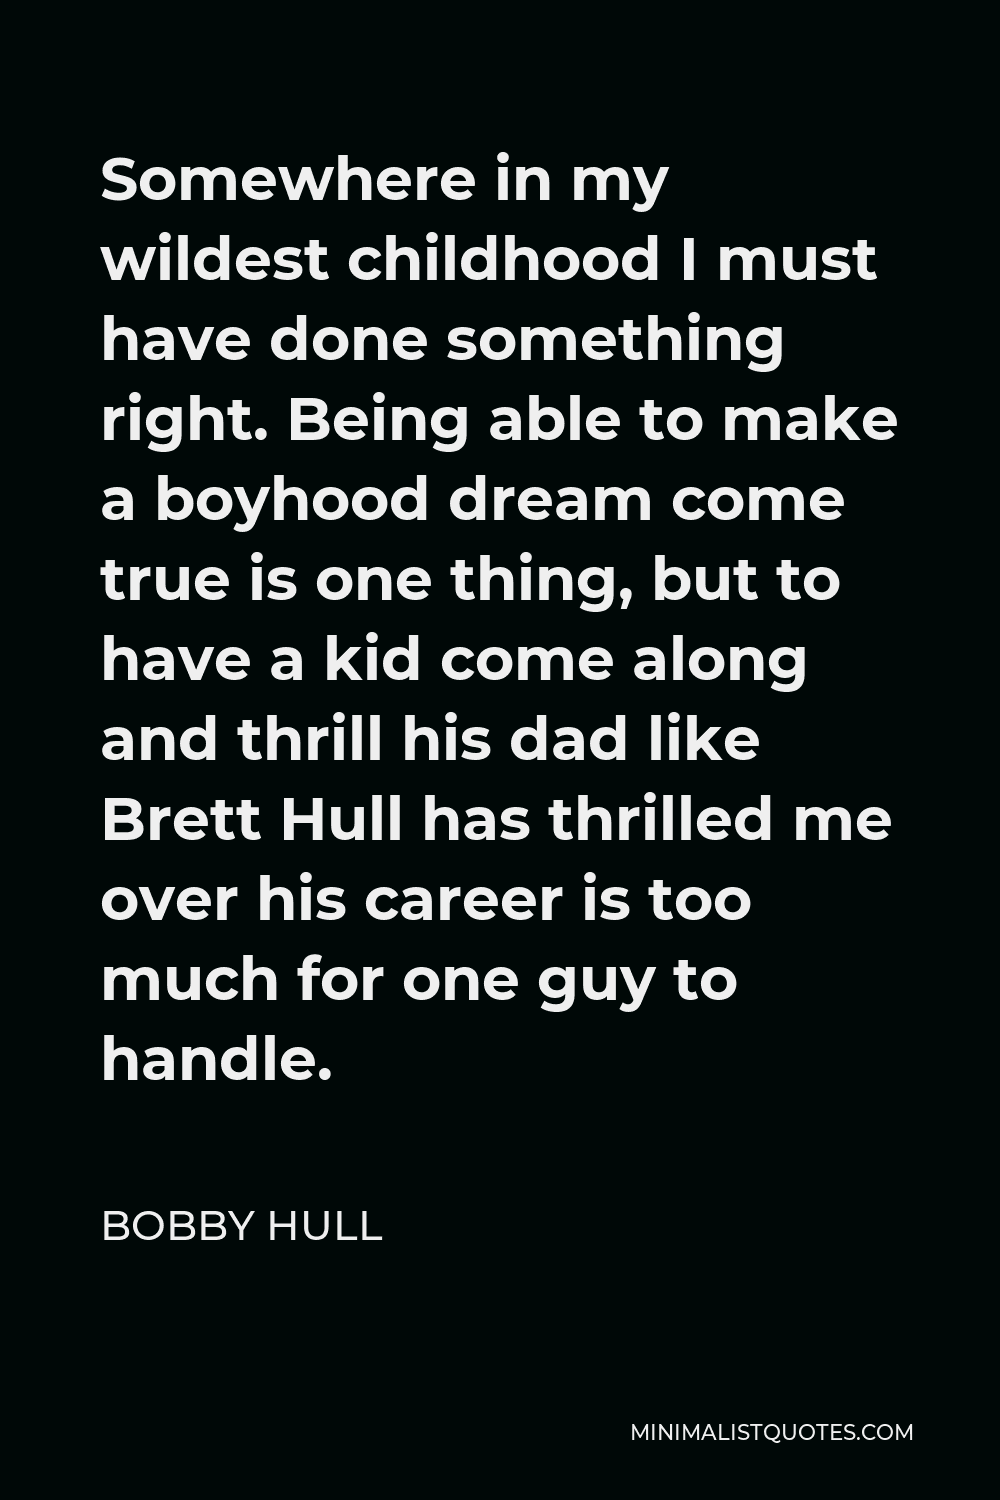 Bobby Hull Quote - Somewhere in my wildest childhood I must have done something right. Being able to make a boyhood dream come true is one thing, but to have a kid come along and thrill his dad like Brett Hull has thrilled me over his career is too much for one guy to handle.